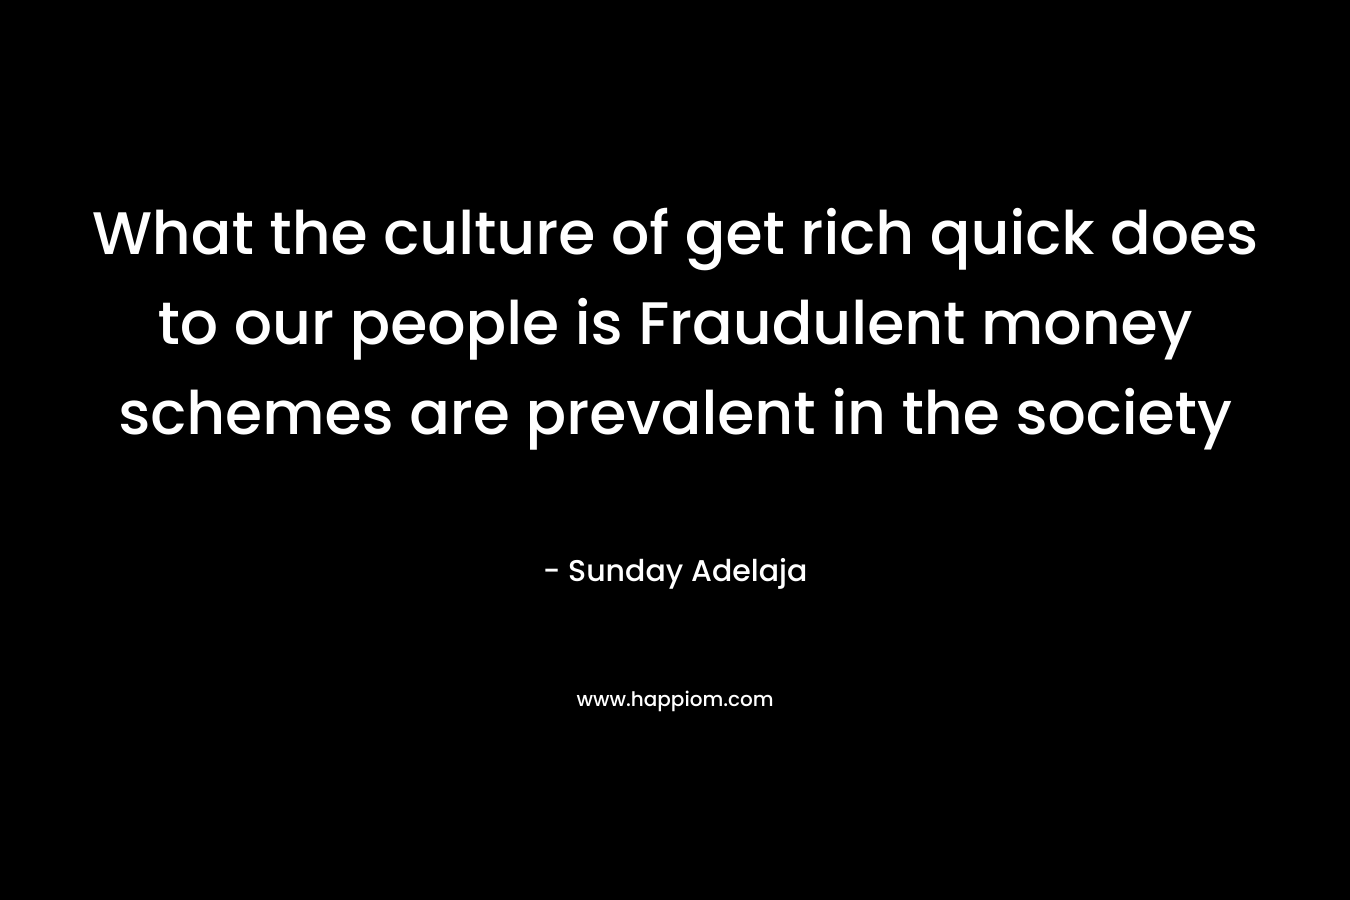 What the culture of get rich quick does to our people is Fraudulent money schemes are prevalent in the society